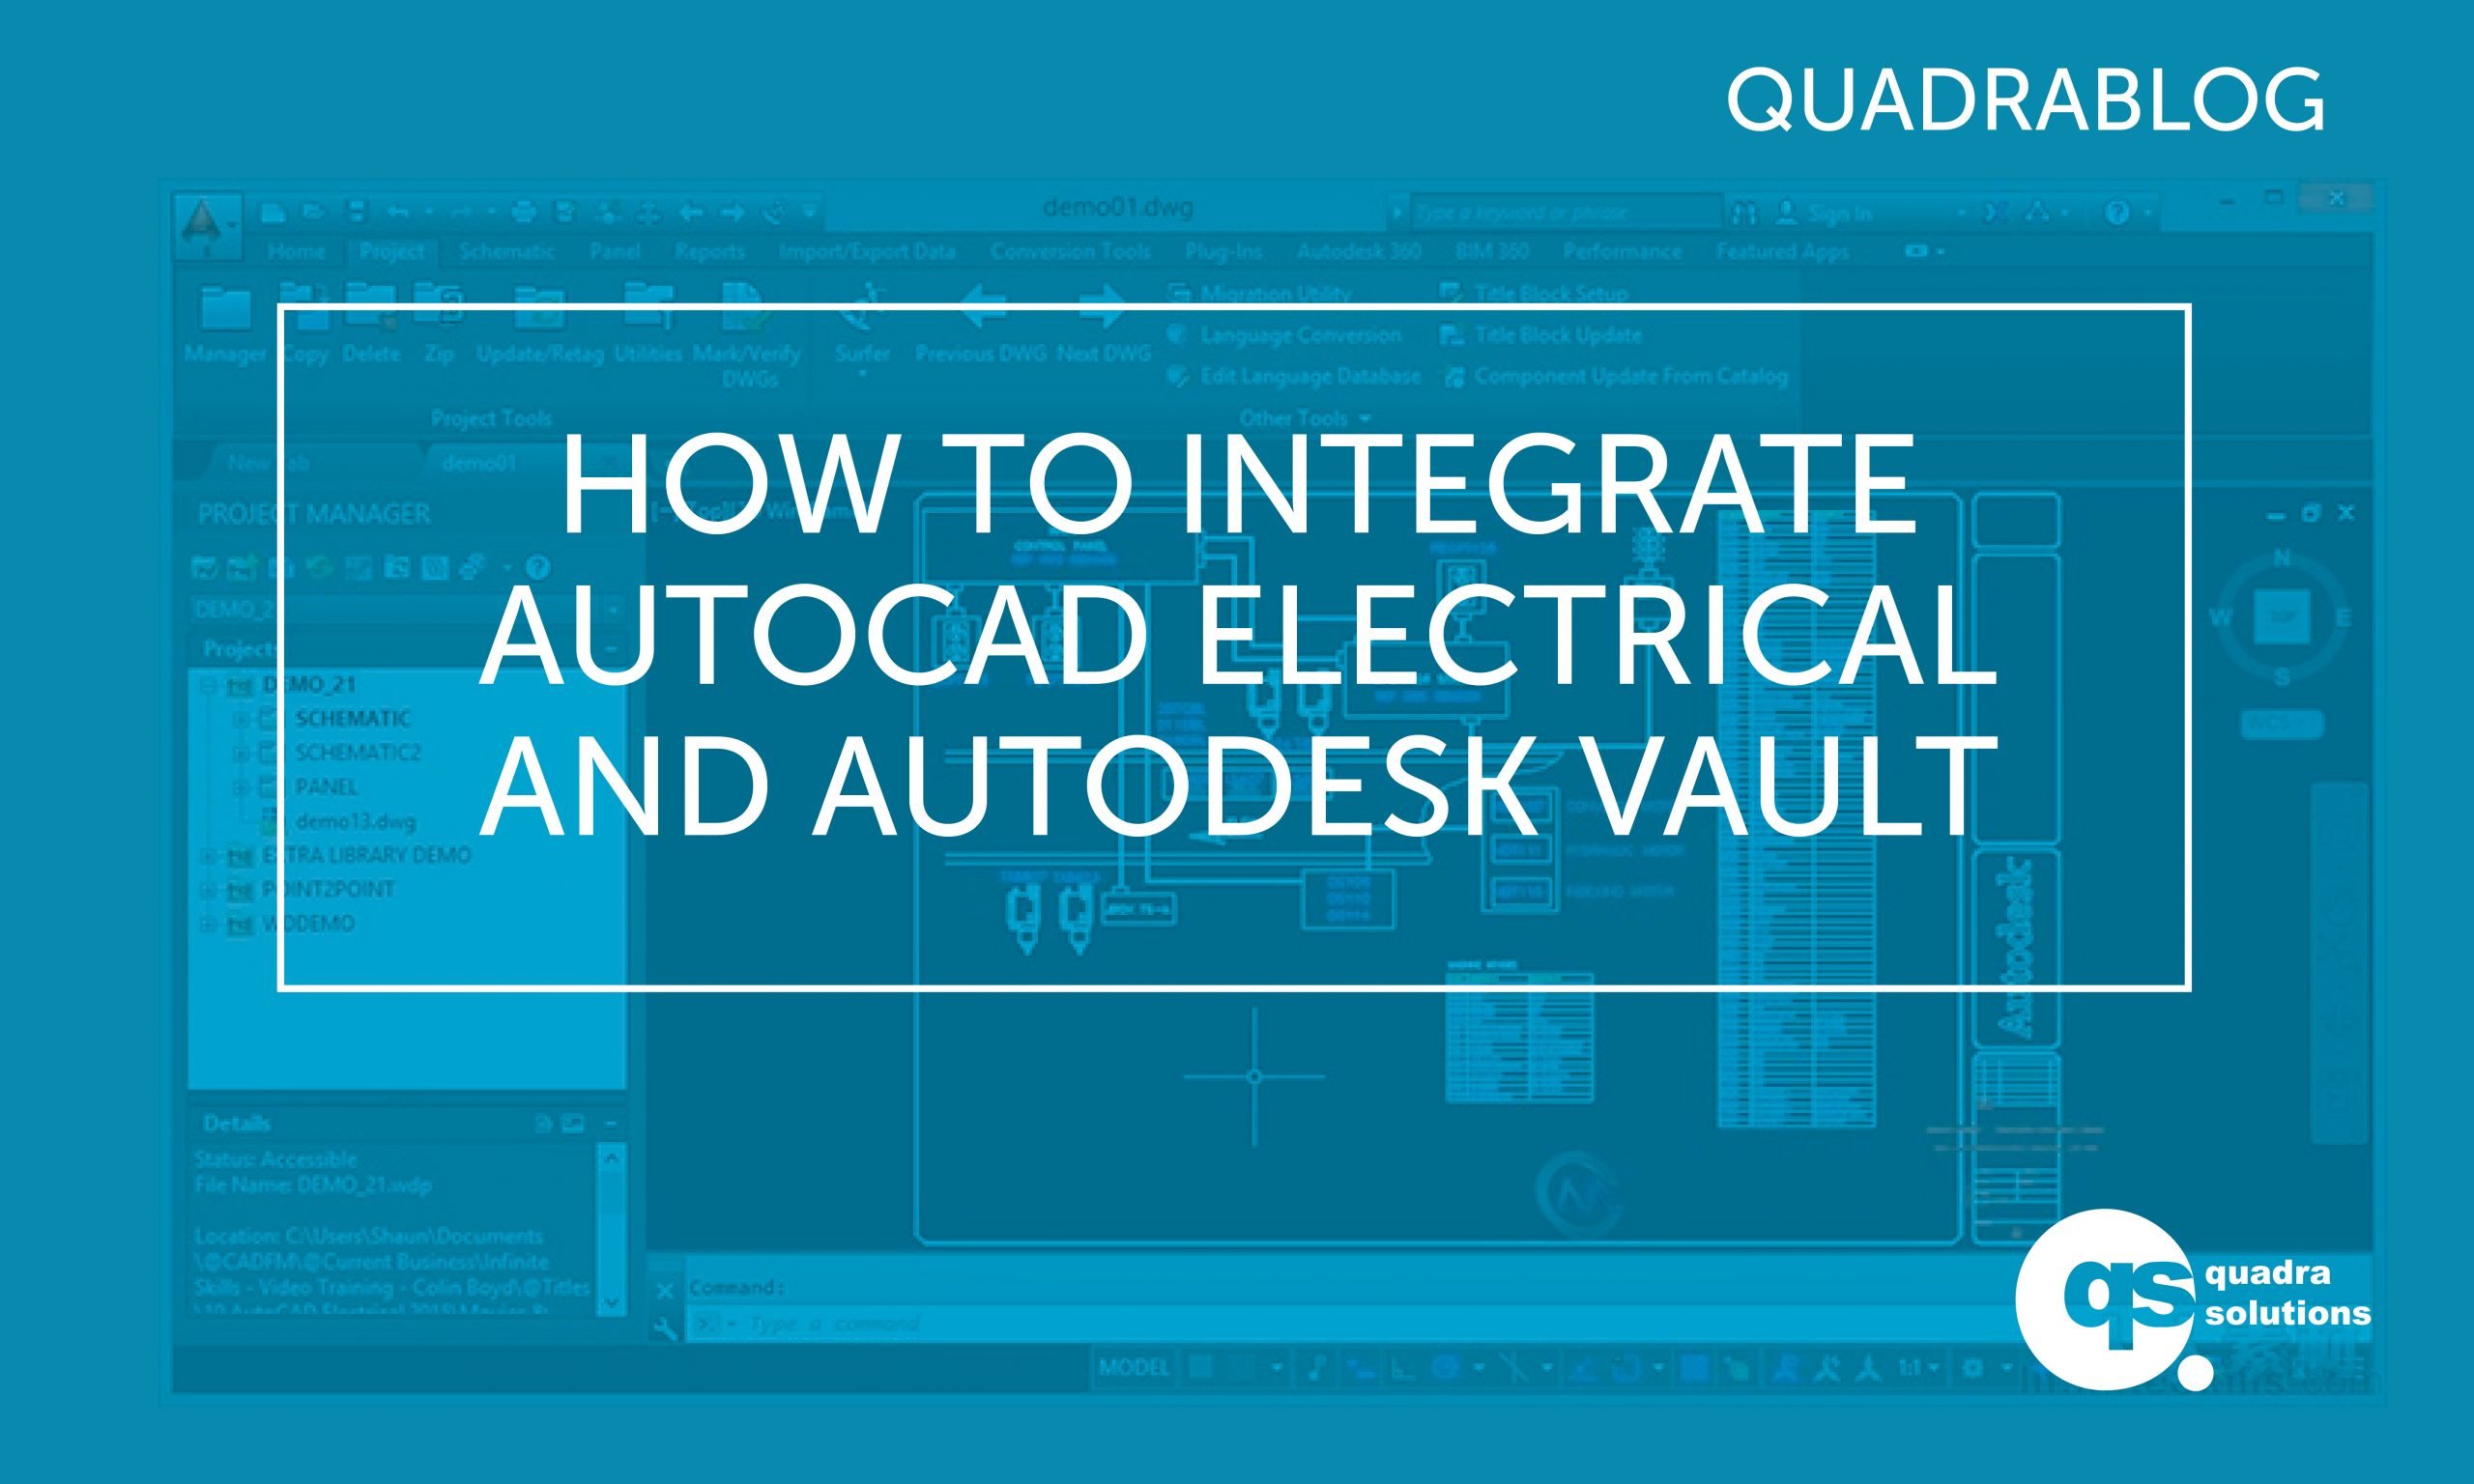 How to Integrate AutoCAD Electrical and Autodesk Vault